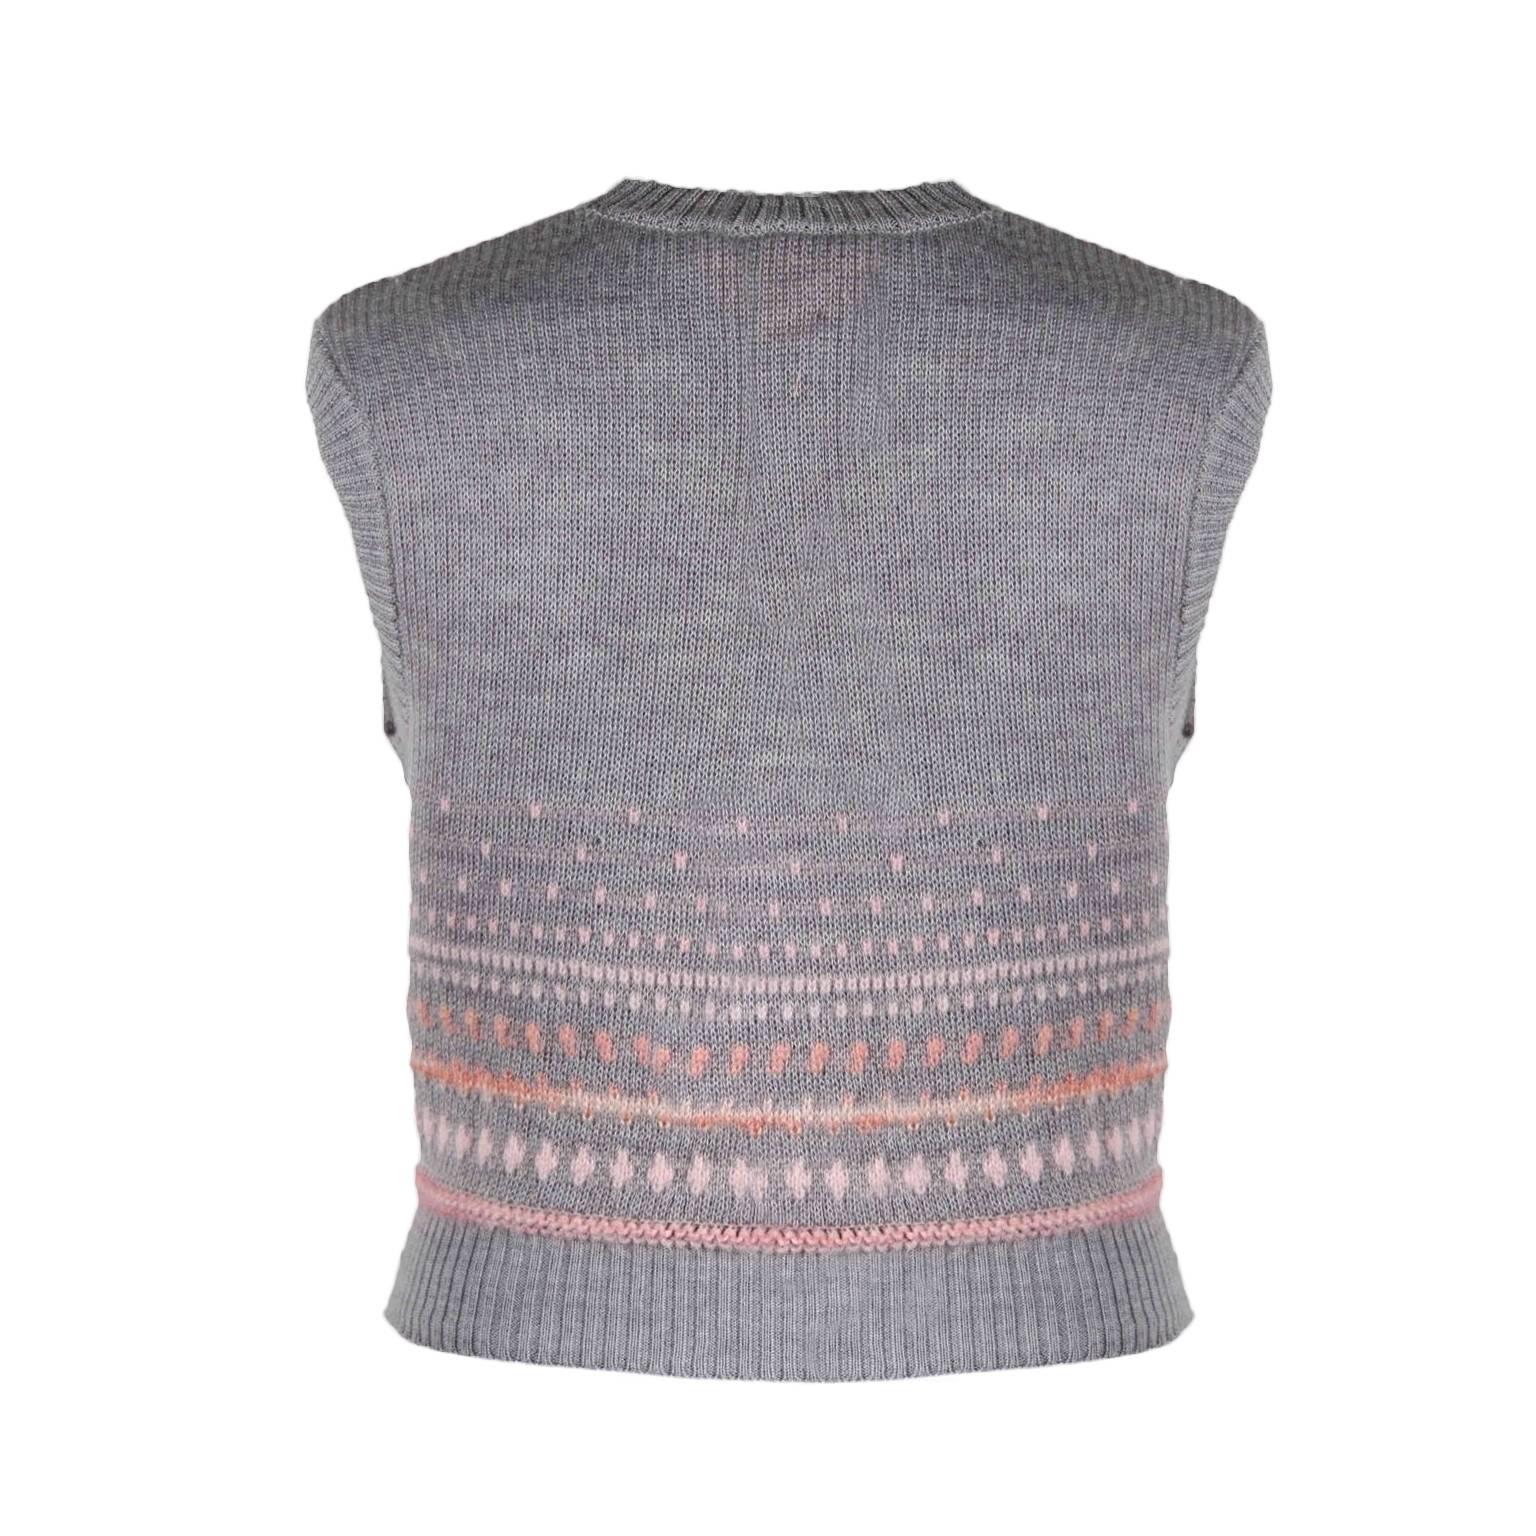 Courreges mohair knit vest from 60's. 
Light grey base, baby pink detailed knit with front button closure.
Fits like 36 EU, 4-6 US
Made in France.

